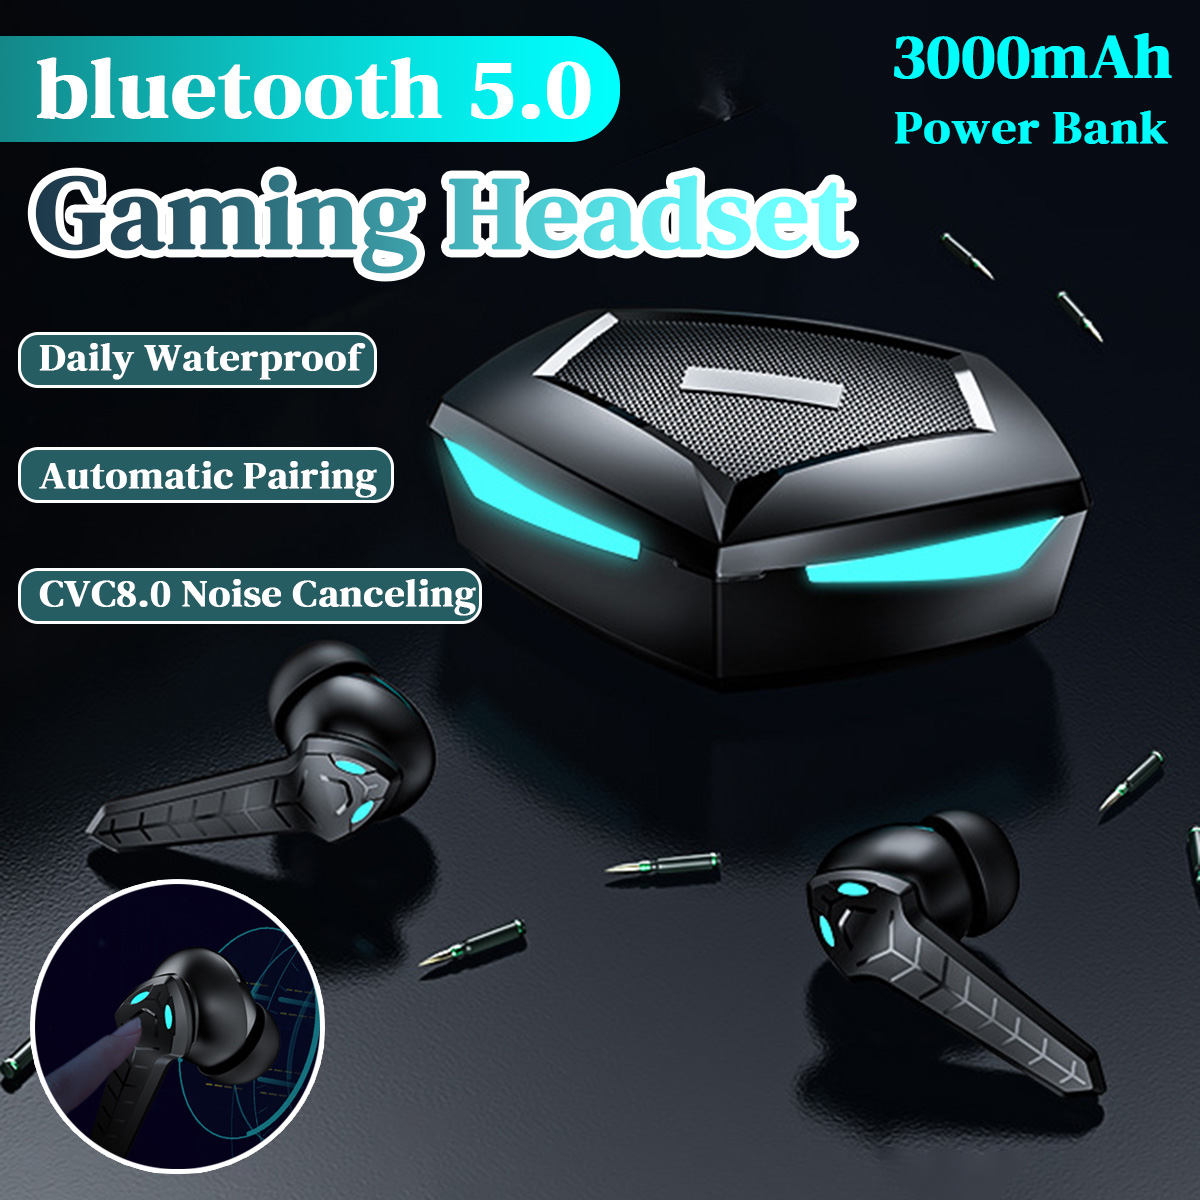 Bakeey-P36-bluetooth-Gaming-Earbuds-Headsets-Low-Latency-Wireless-Headset-with-3000mAh-Charging-Box-1866291-1